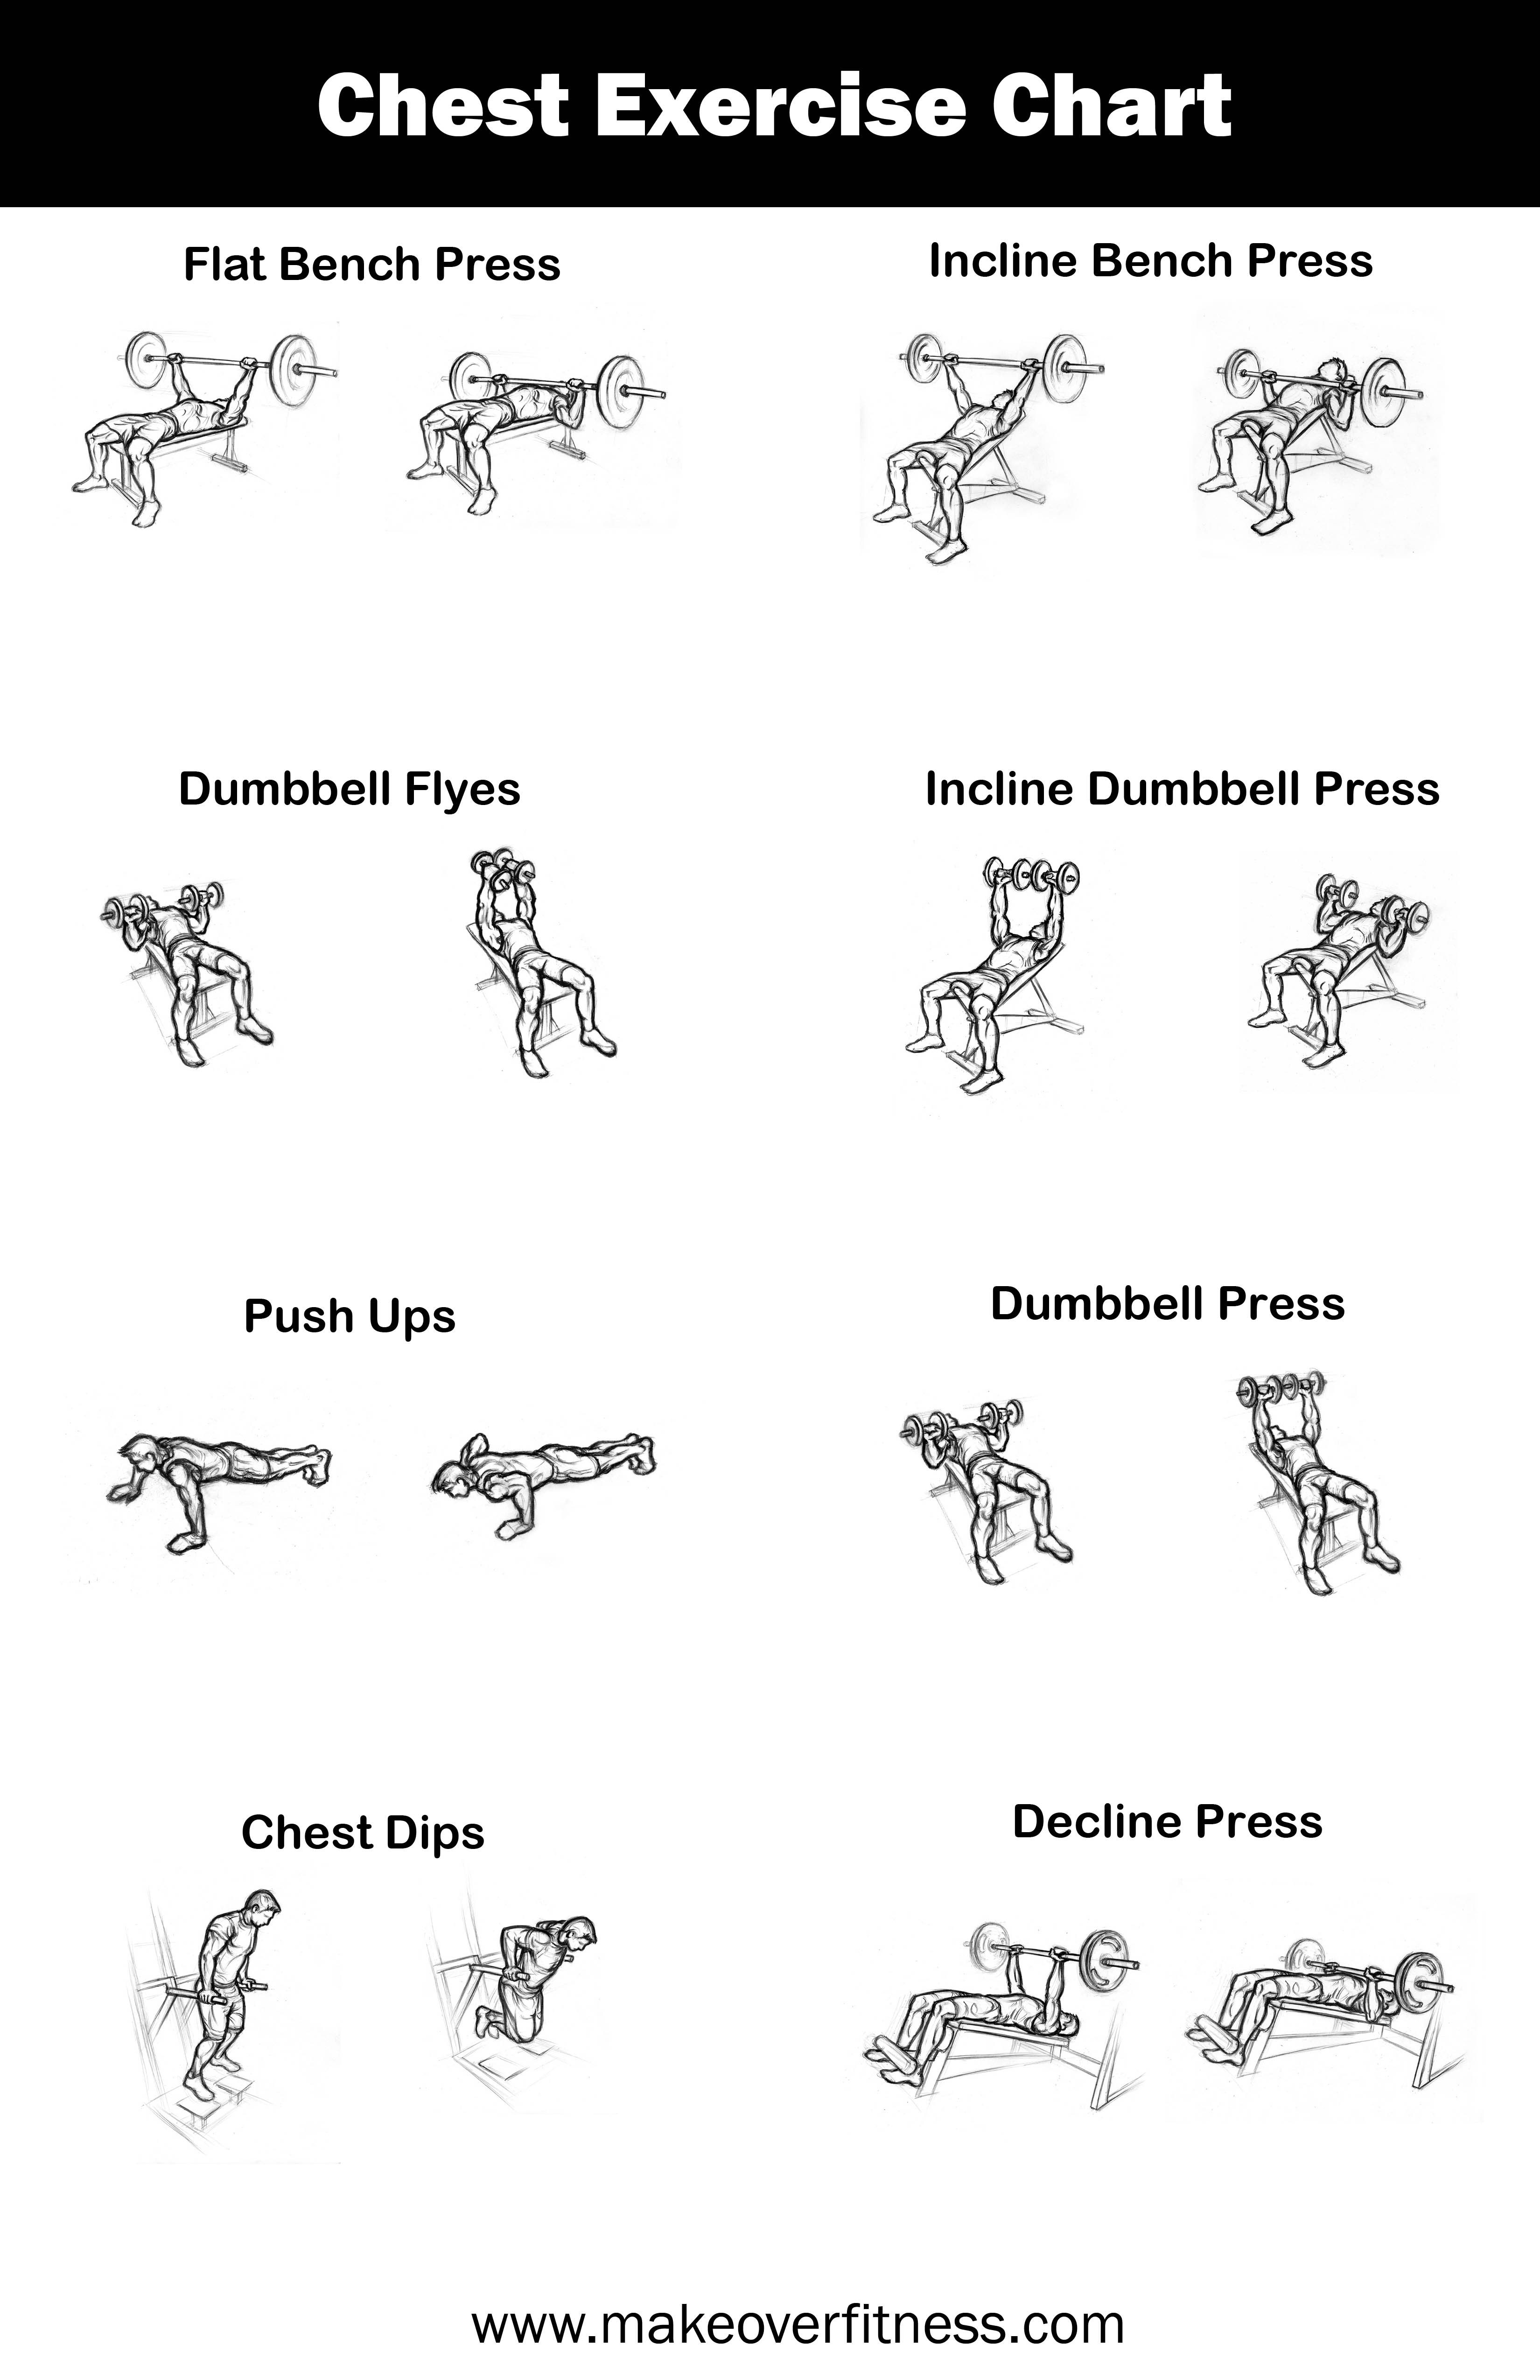 Chest Exercise Chart - Free Printable Gym Workout Routines